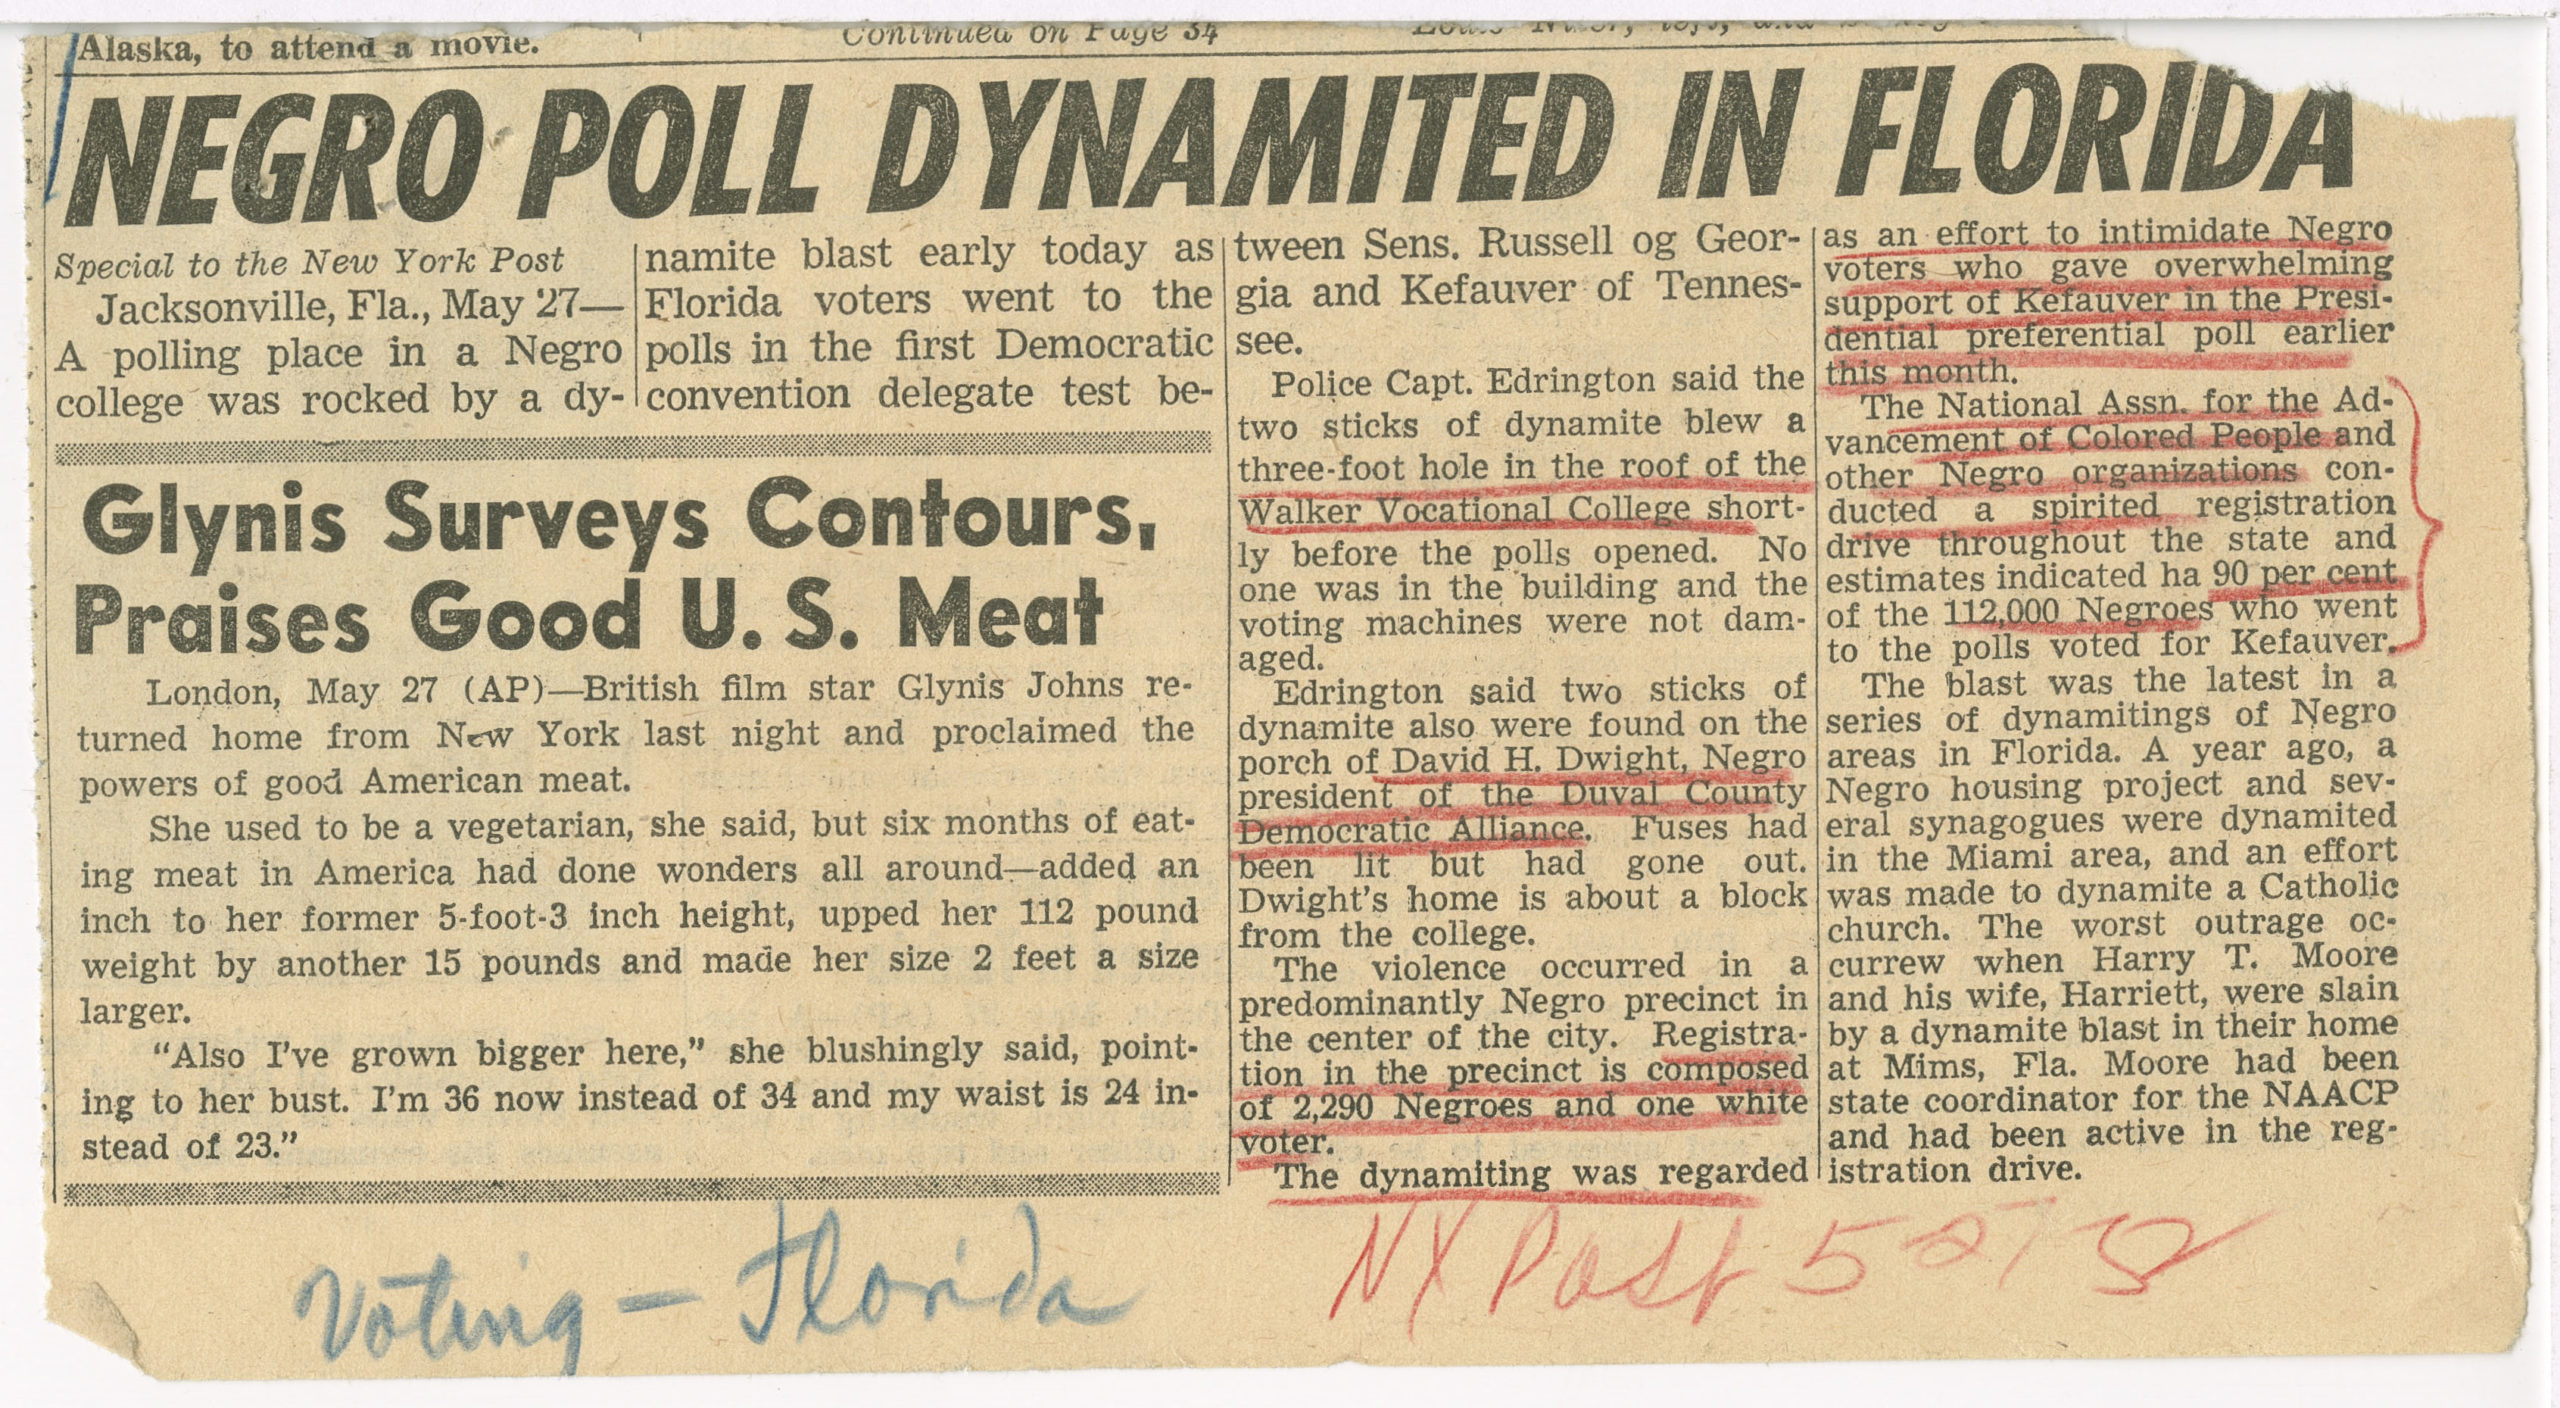 Negro Poll Dynamited in Florida,NY Post,1952 May 27,Johnson Publishing Company Clippings File Collection